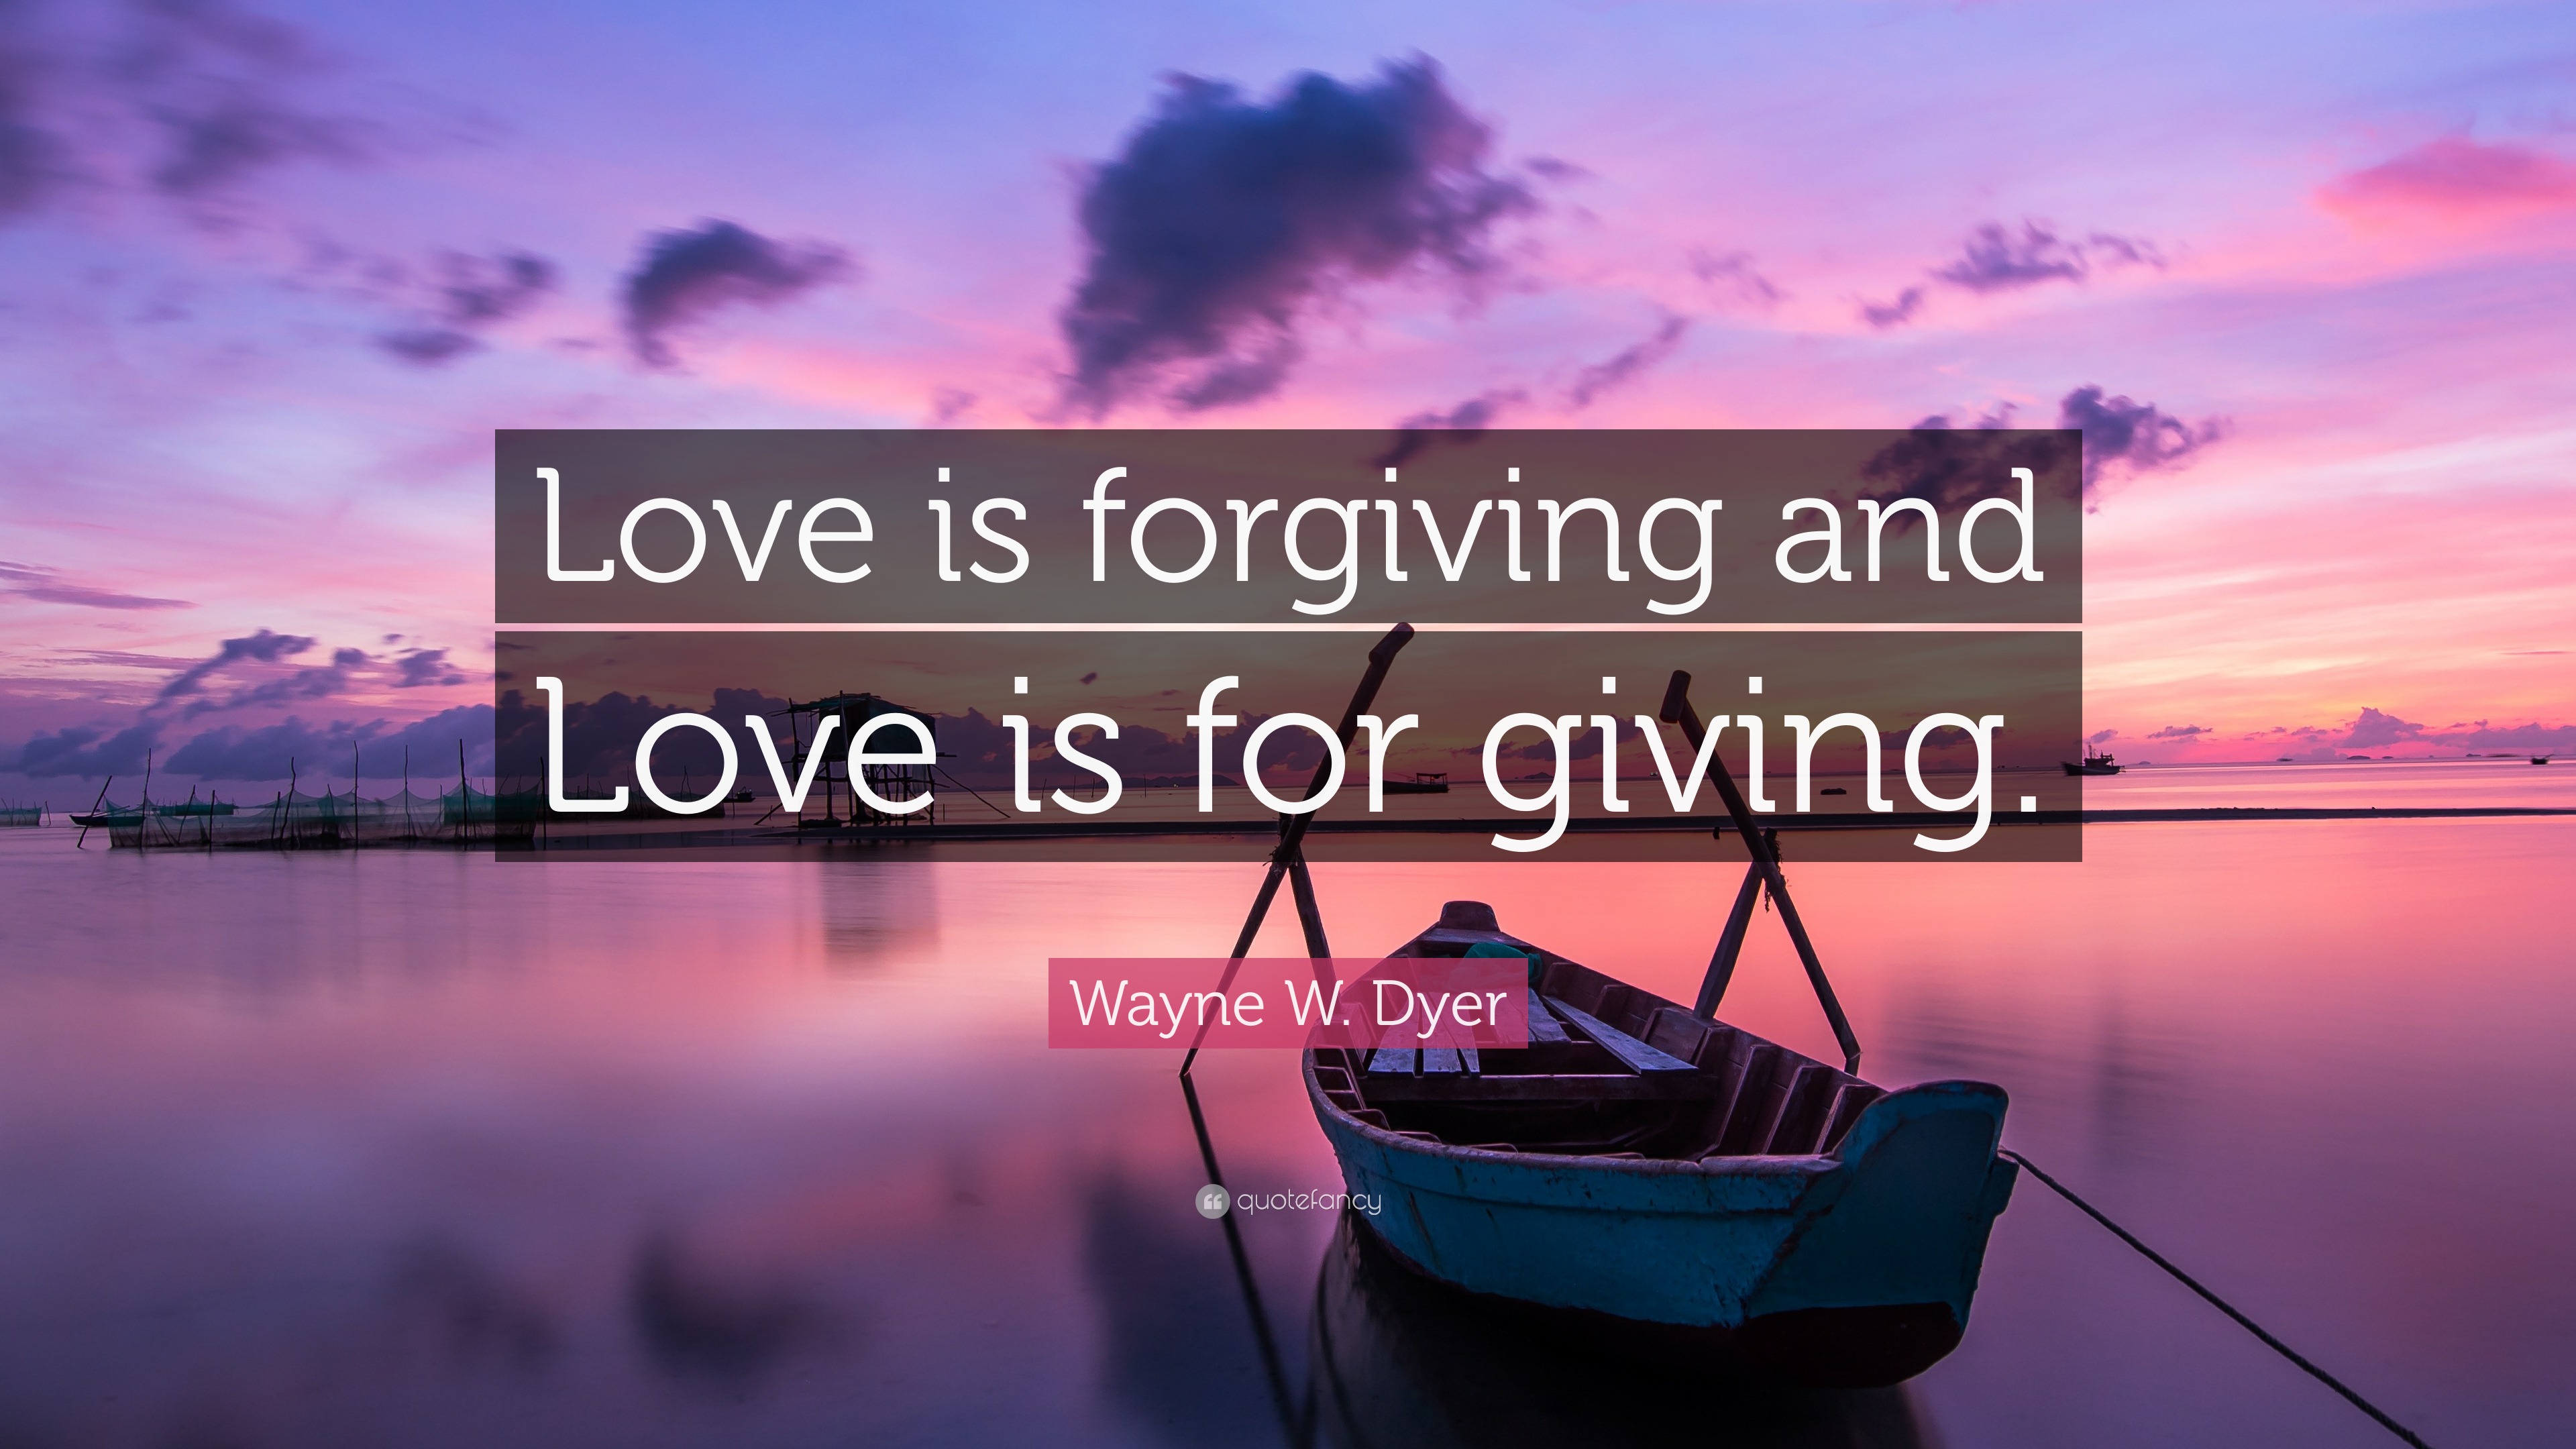 essay on love is giving and forgiving